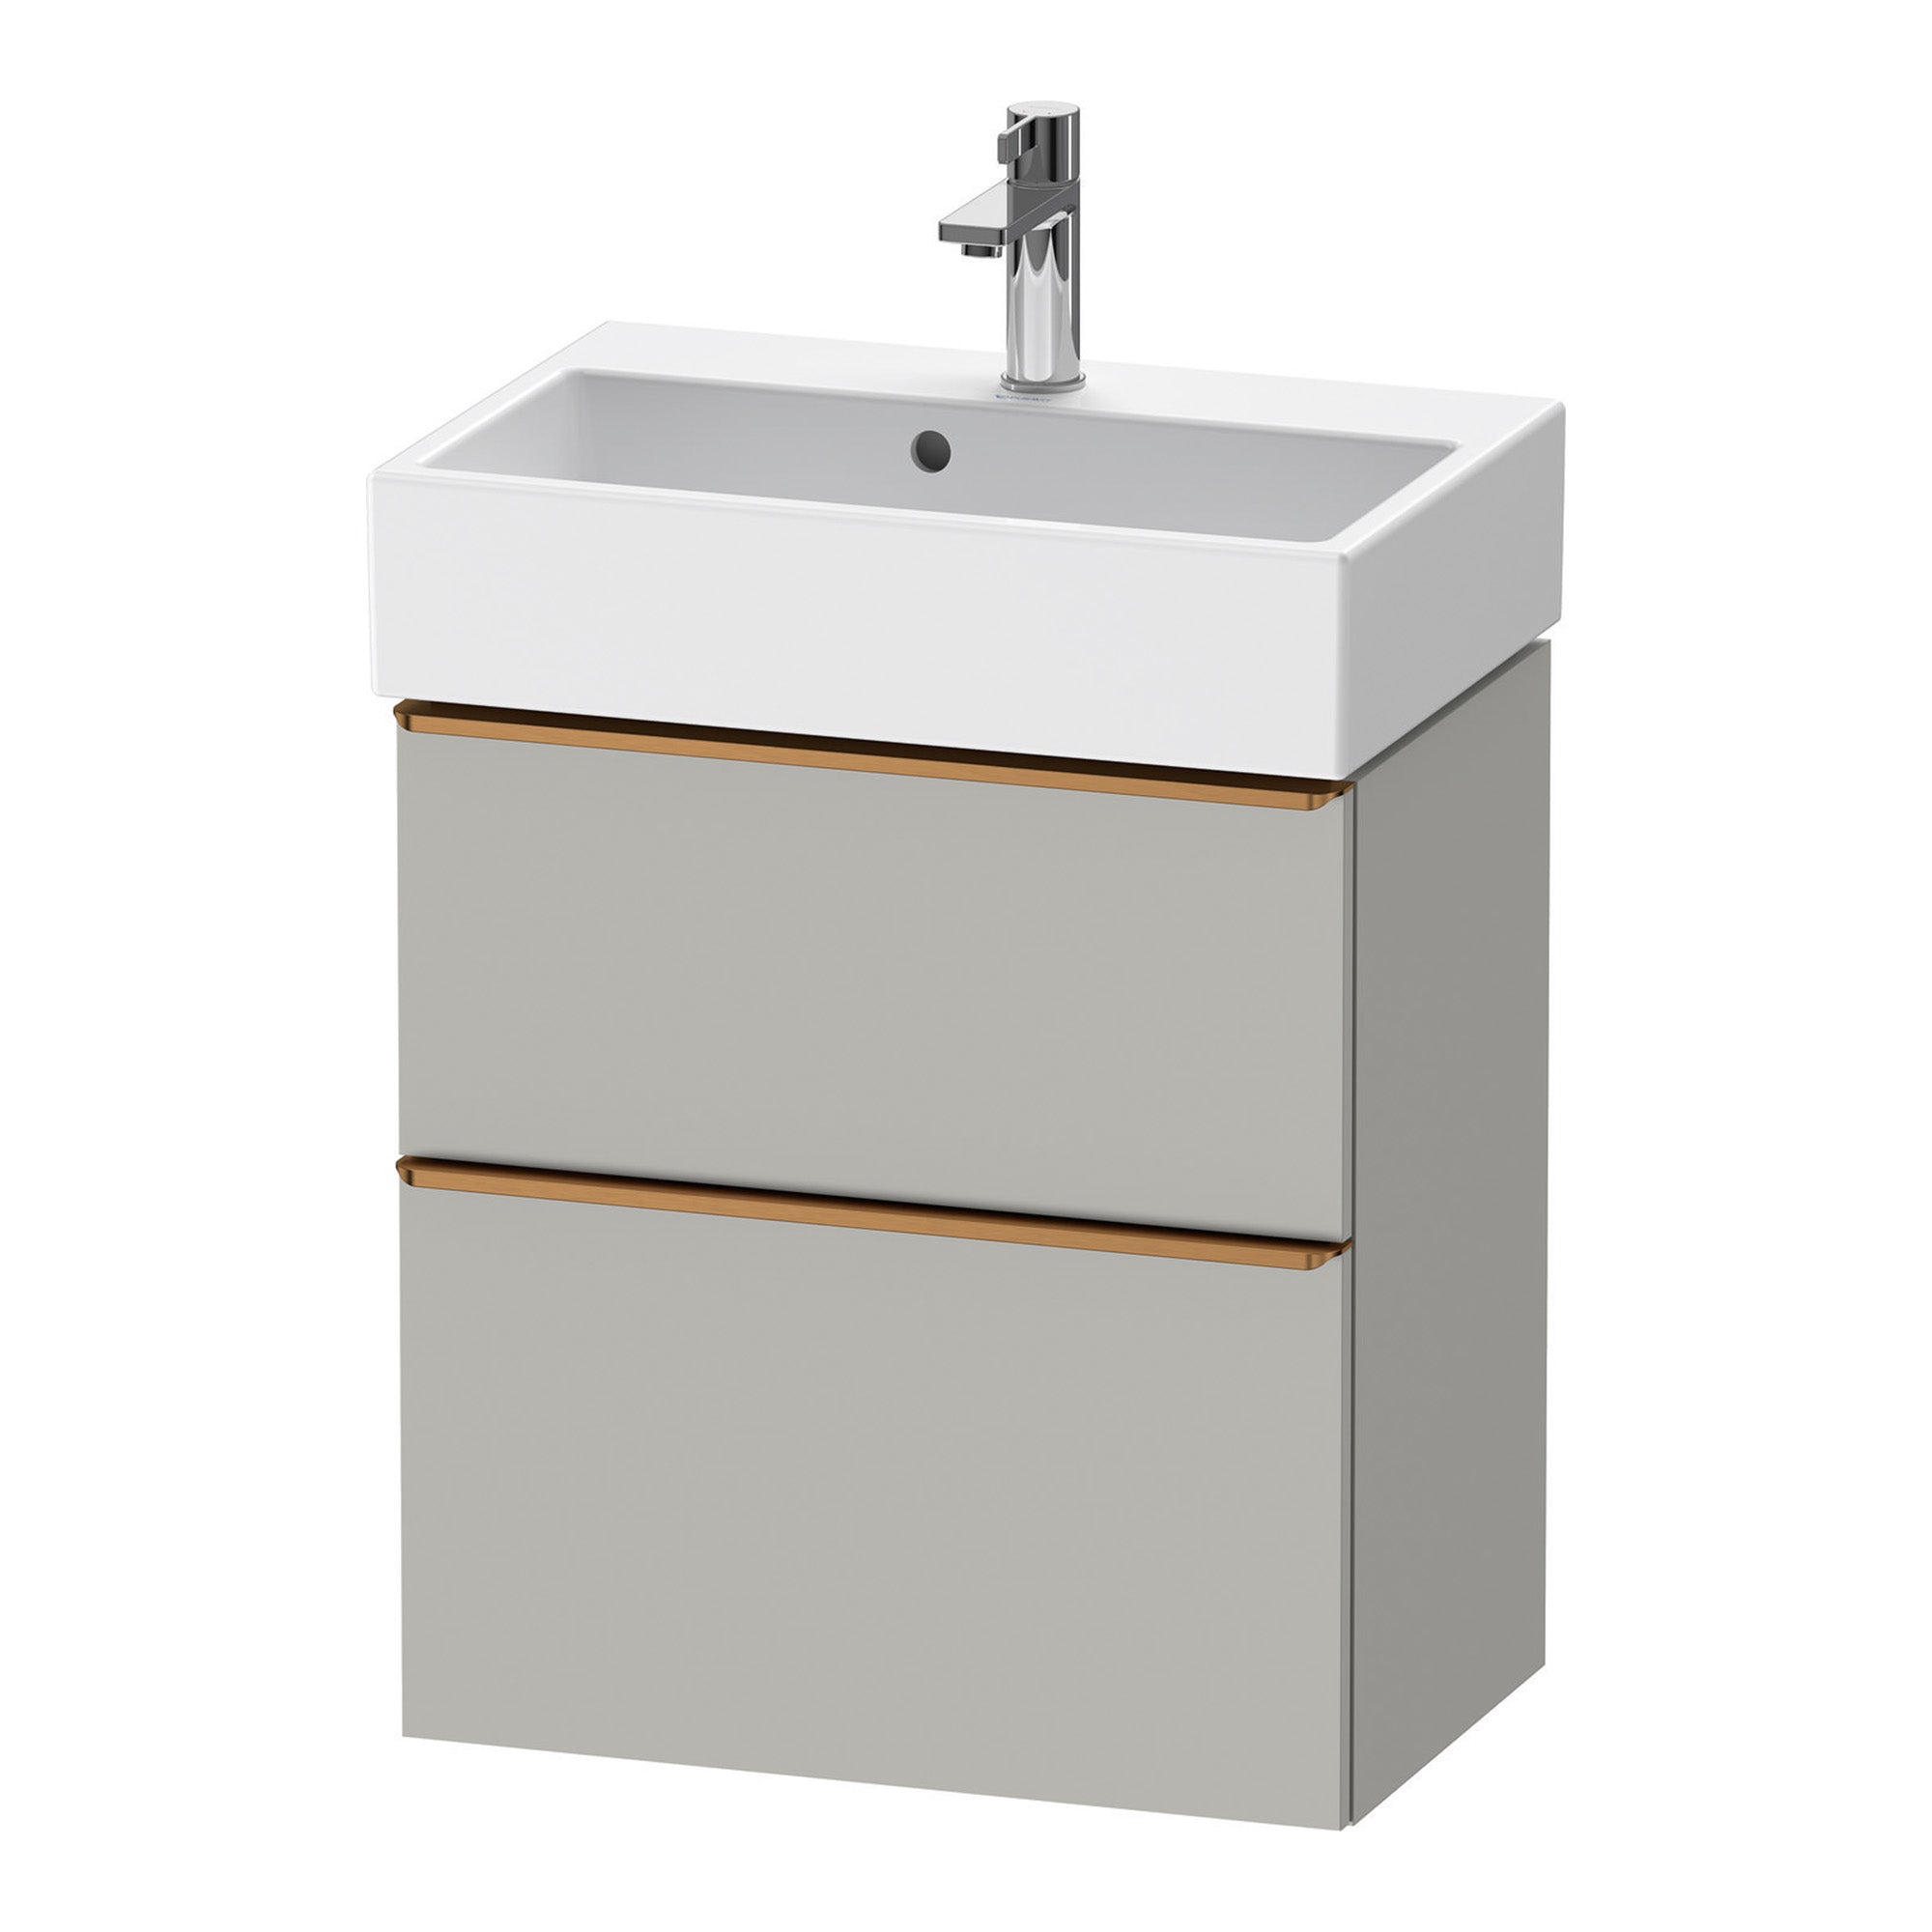 duravit d-neo 600 wall mounted vanity-unit with vero basin concrete grey brushed bronze handles